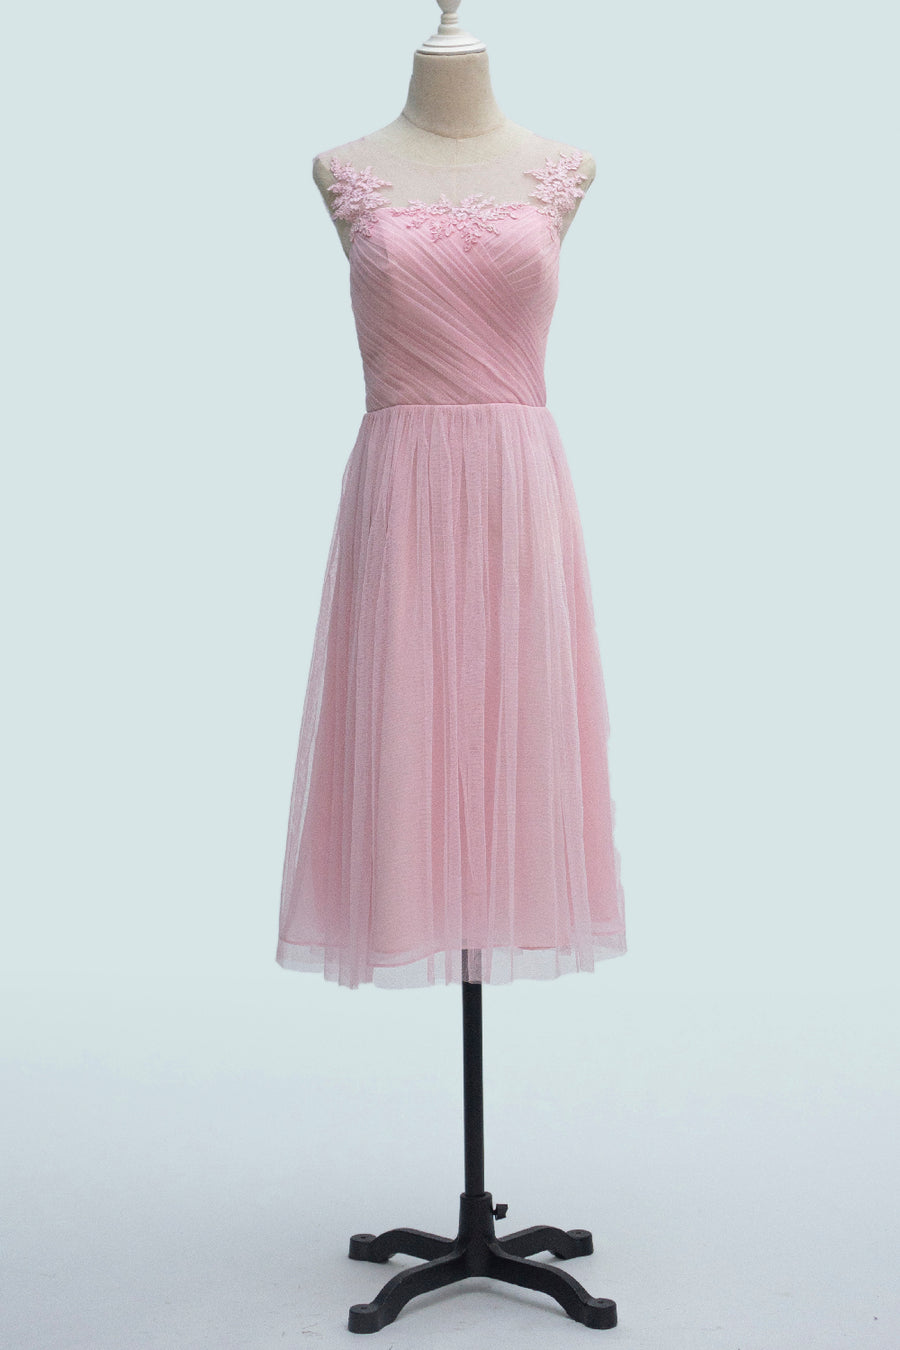 Candy Pink A-line Illusion Tulle Pleated Applique Knee Length Bridesmaid Dress